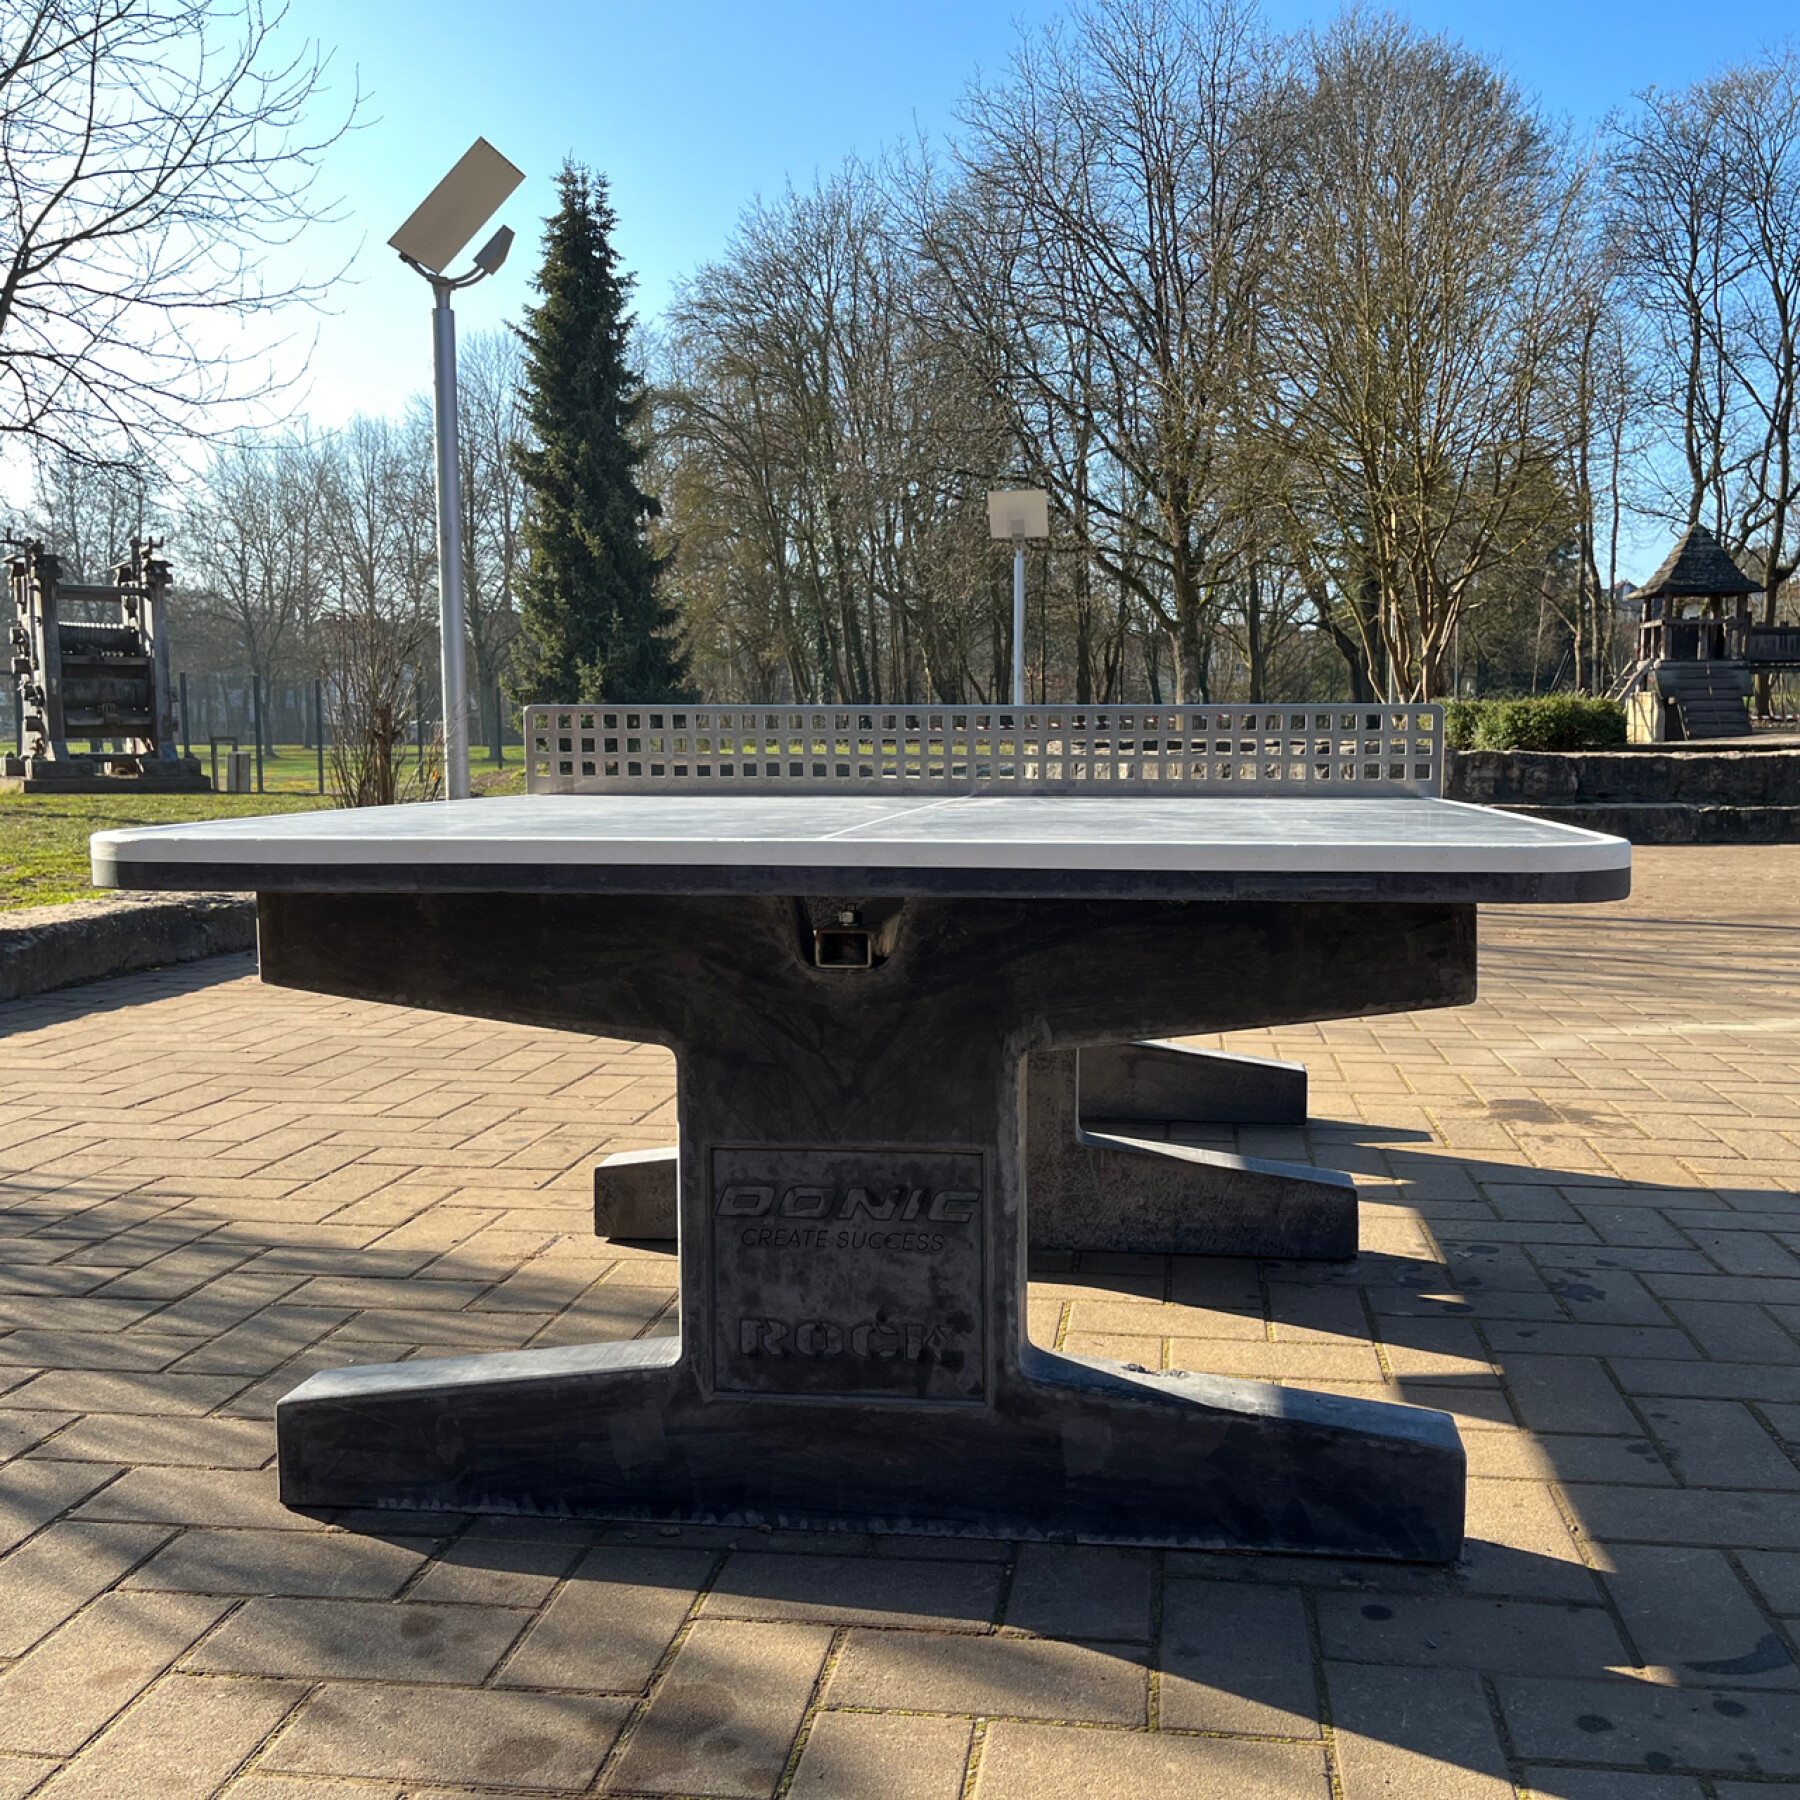 Table tennis table with rounded corners and net Donic Betontisch Rock